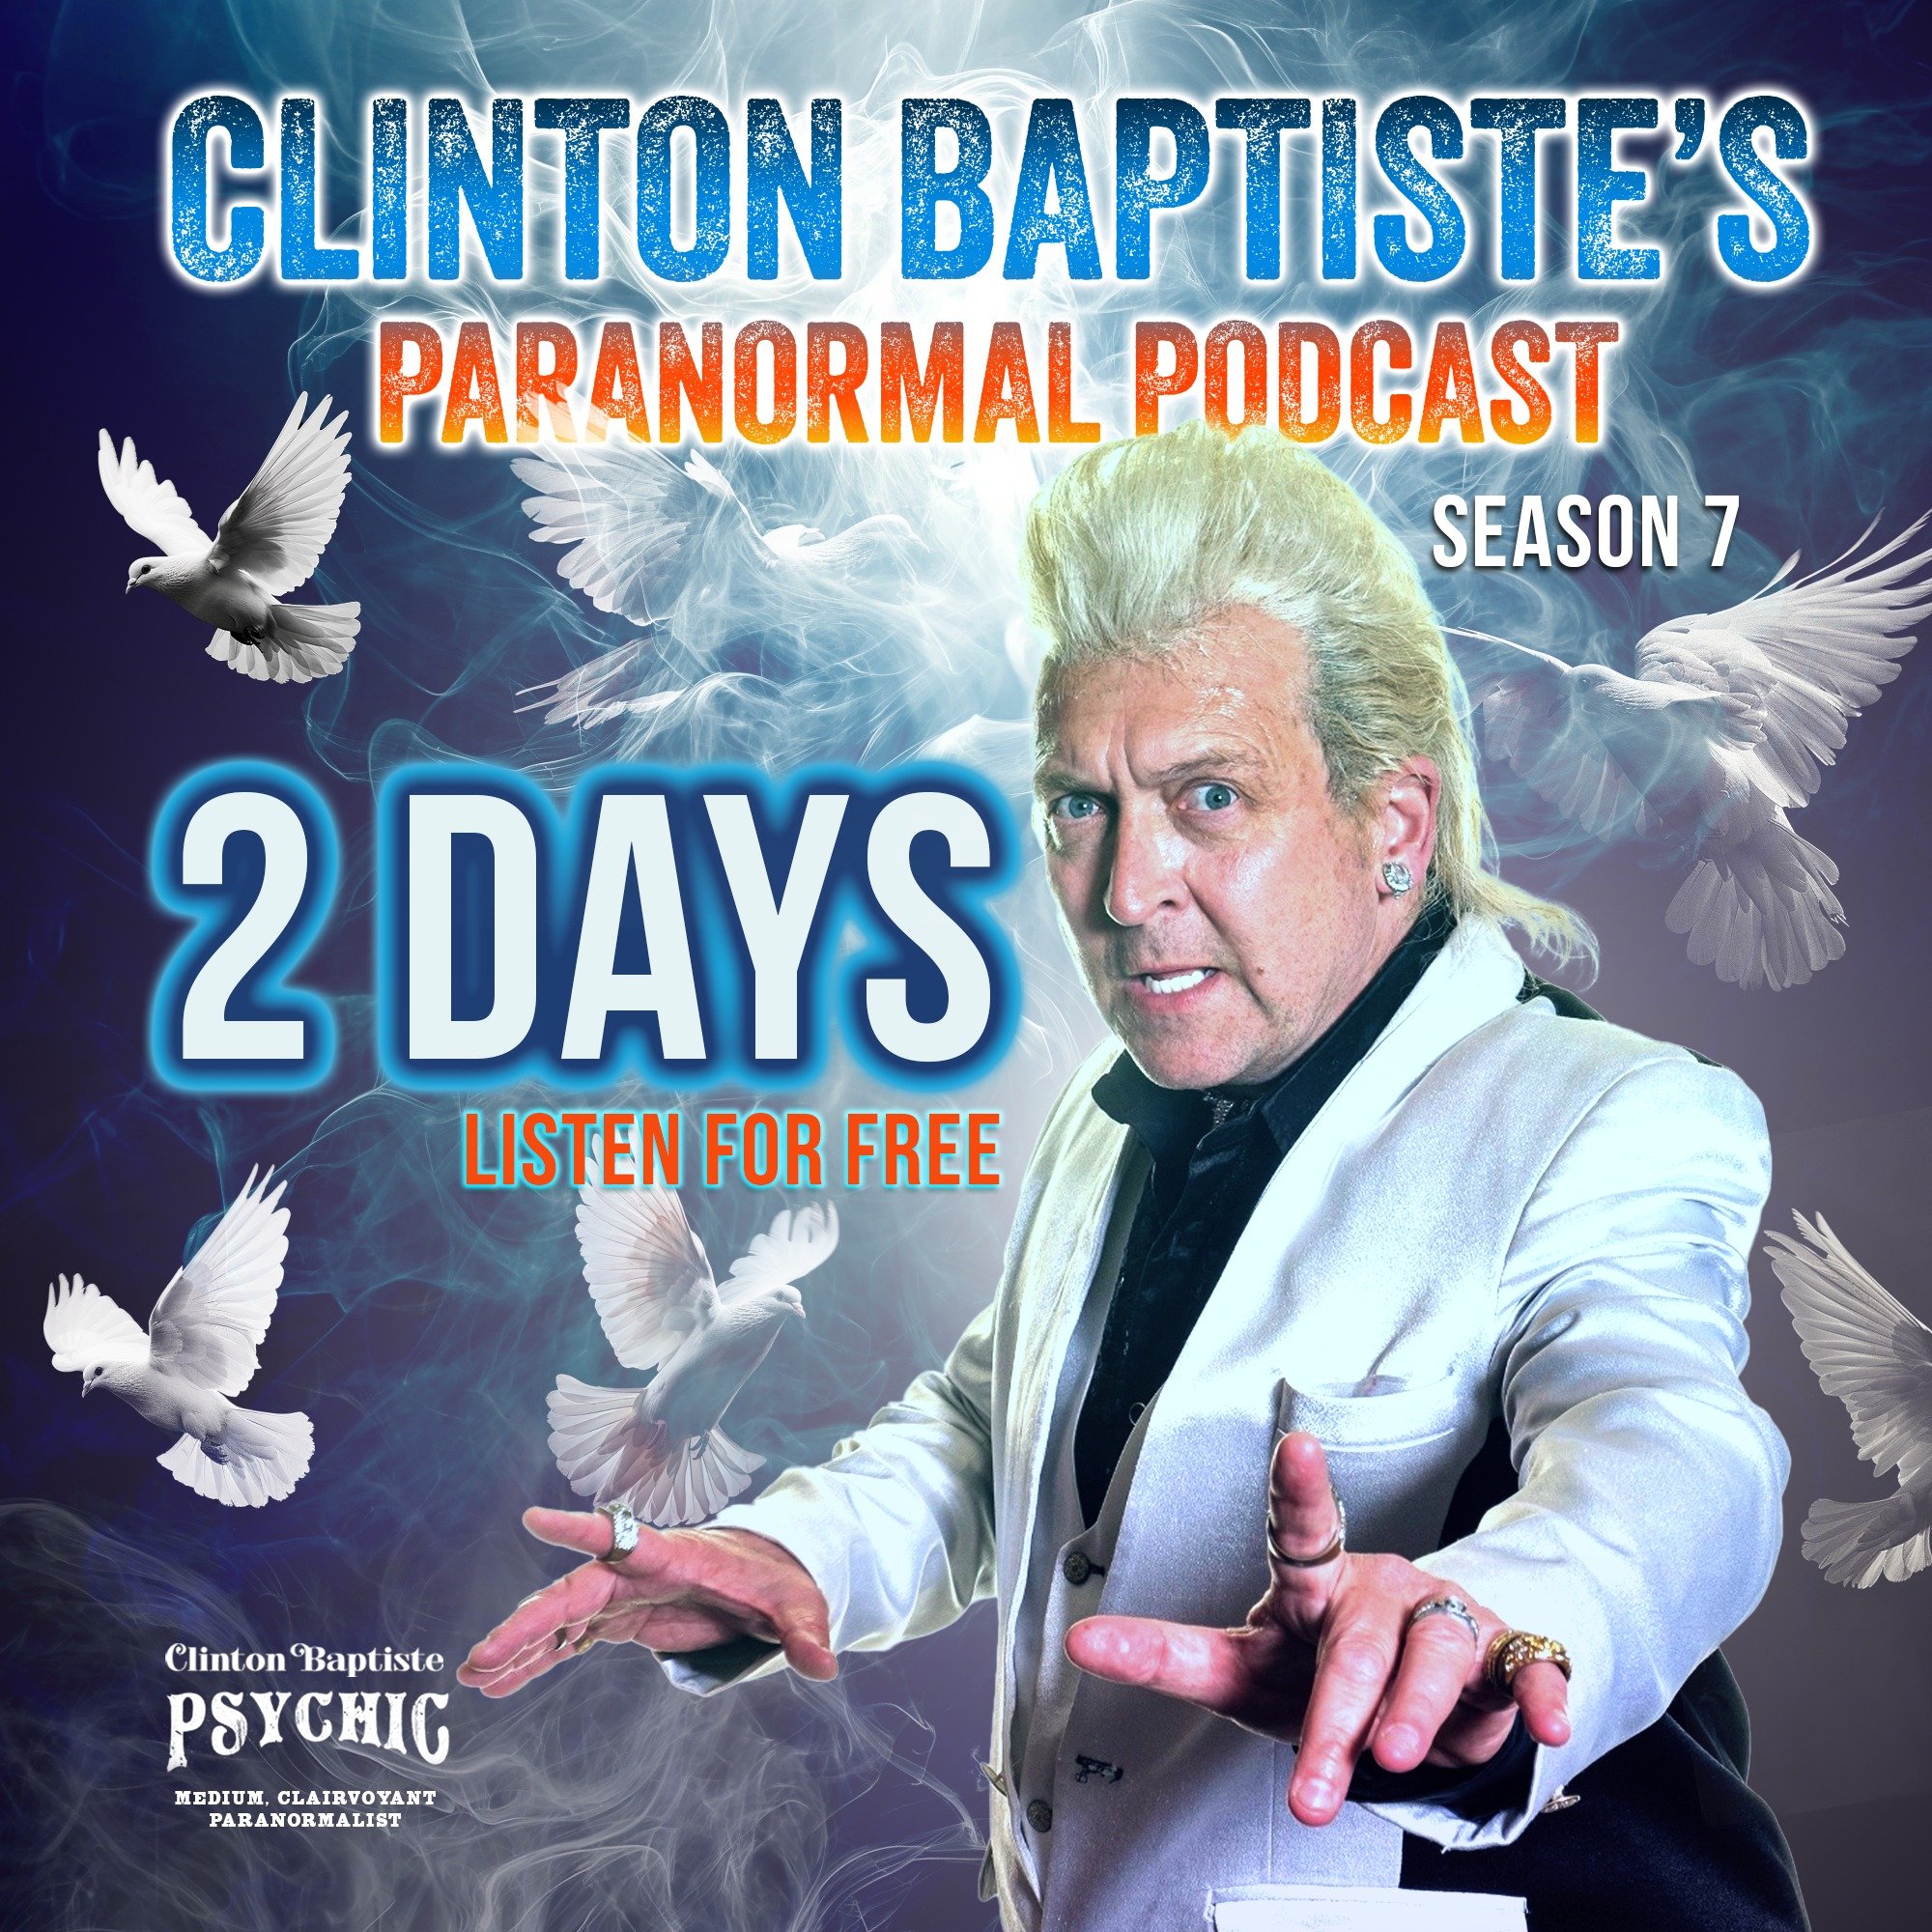 Only 2 days left until the big reveal! 🌟 Tune in to the new season of the Clinton Baptiste Paranormal Podcast on May the 3rd. Don't miss out on the mystique and mayhem! Listen for free at www.patreon.com/clintonbaptiste #3rdeye